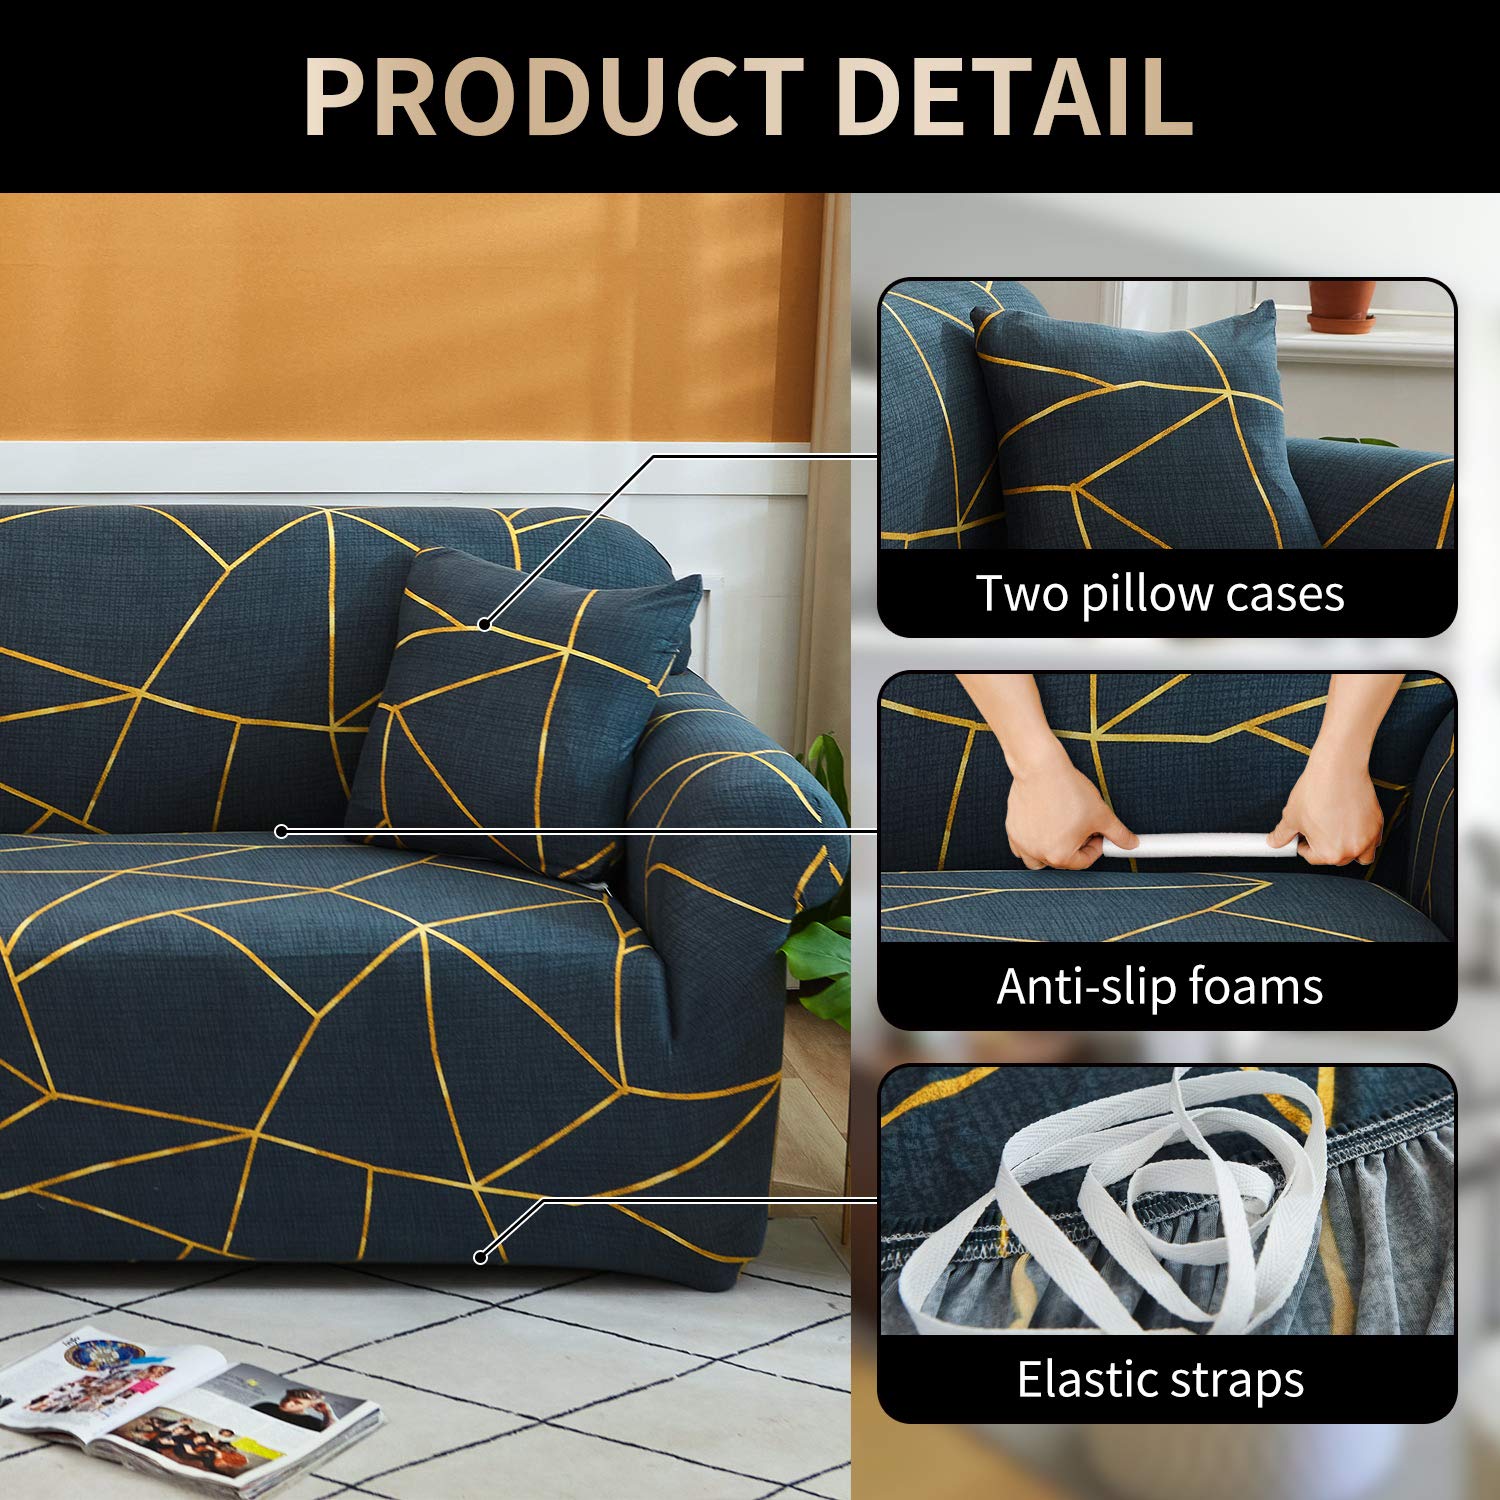 Stretch Printed Spandex Non Slip Soft Couch Sofa Cover, Washable Furniture Protector with Non Skid Foam and Elastic Bottom for Kids, Pets